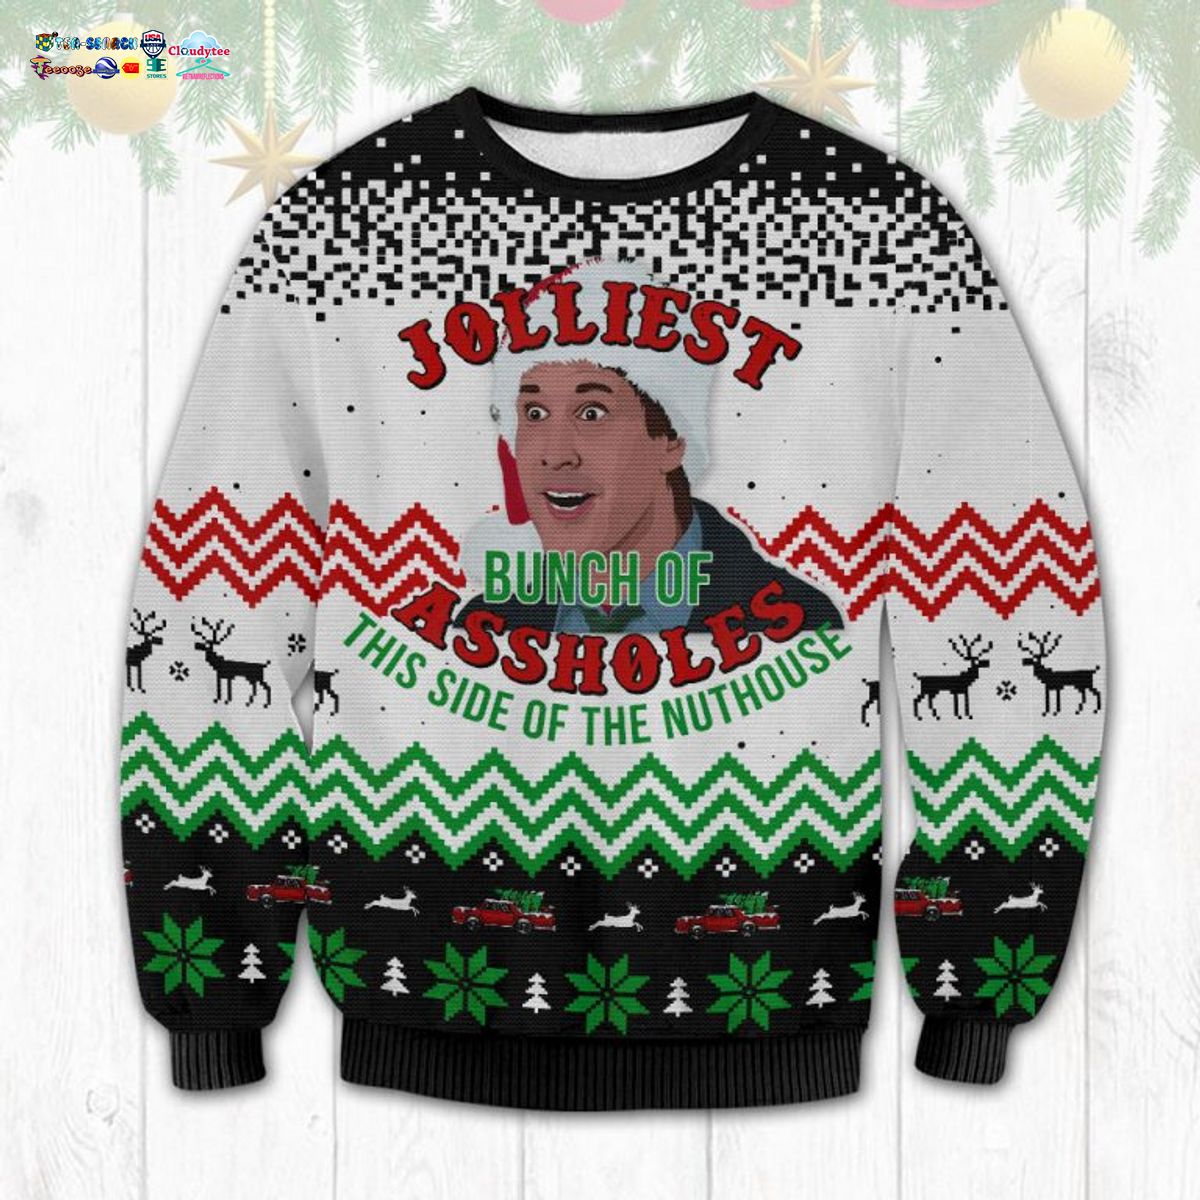 Christmas Vacation Jolliest Bunch of Assholes This Side of The Nuthouse Ugly Christmas Sweater